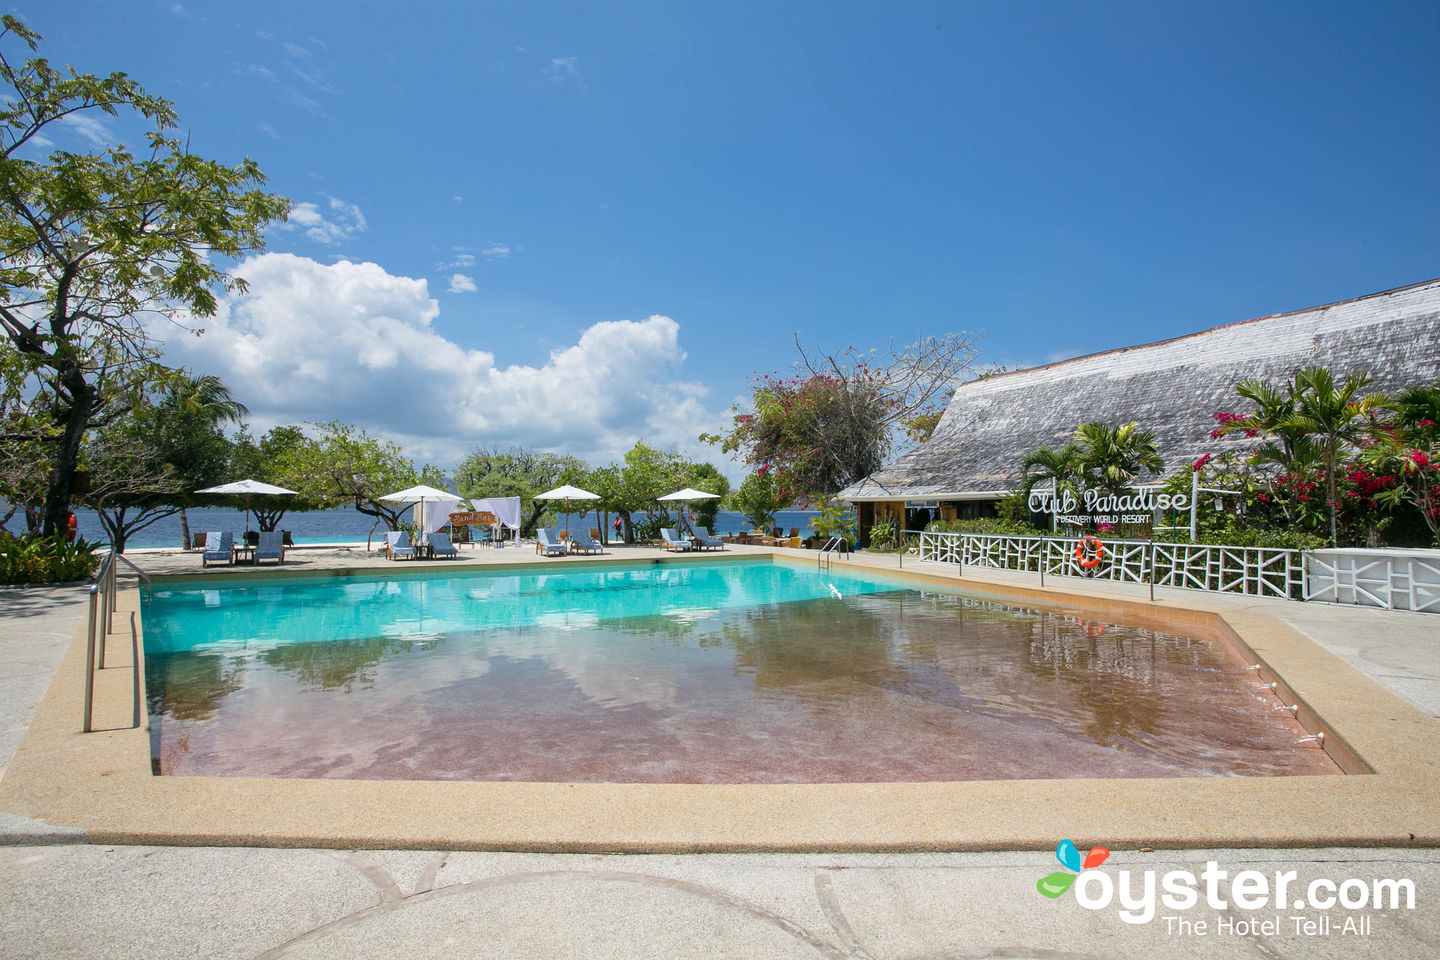 Club Paradise Palawan Review: What To REALLY Expect If You Stay